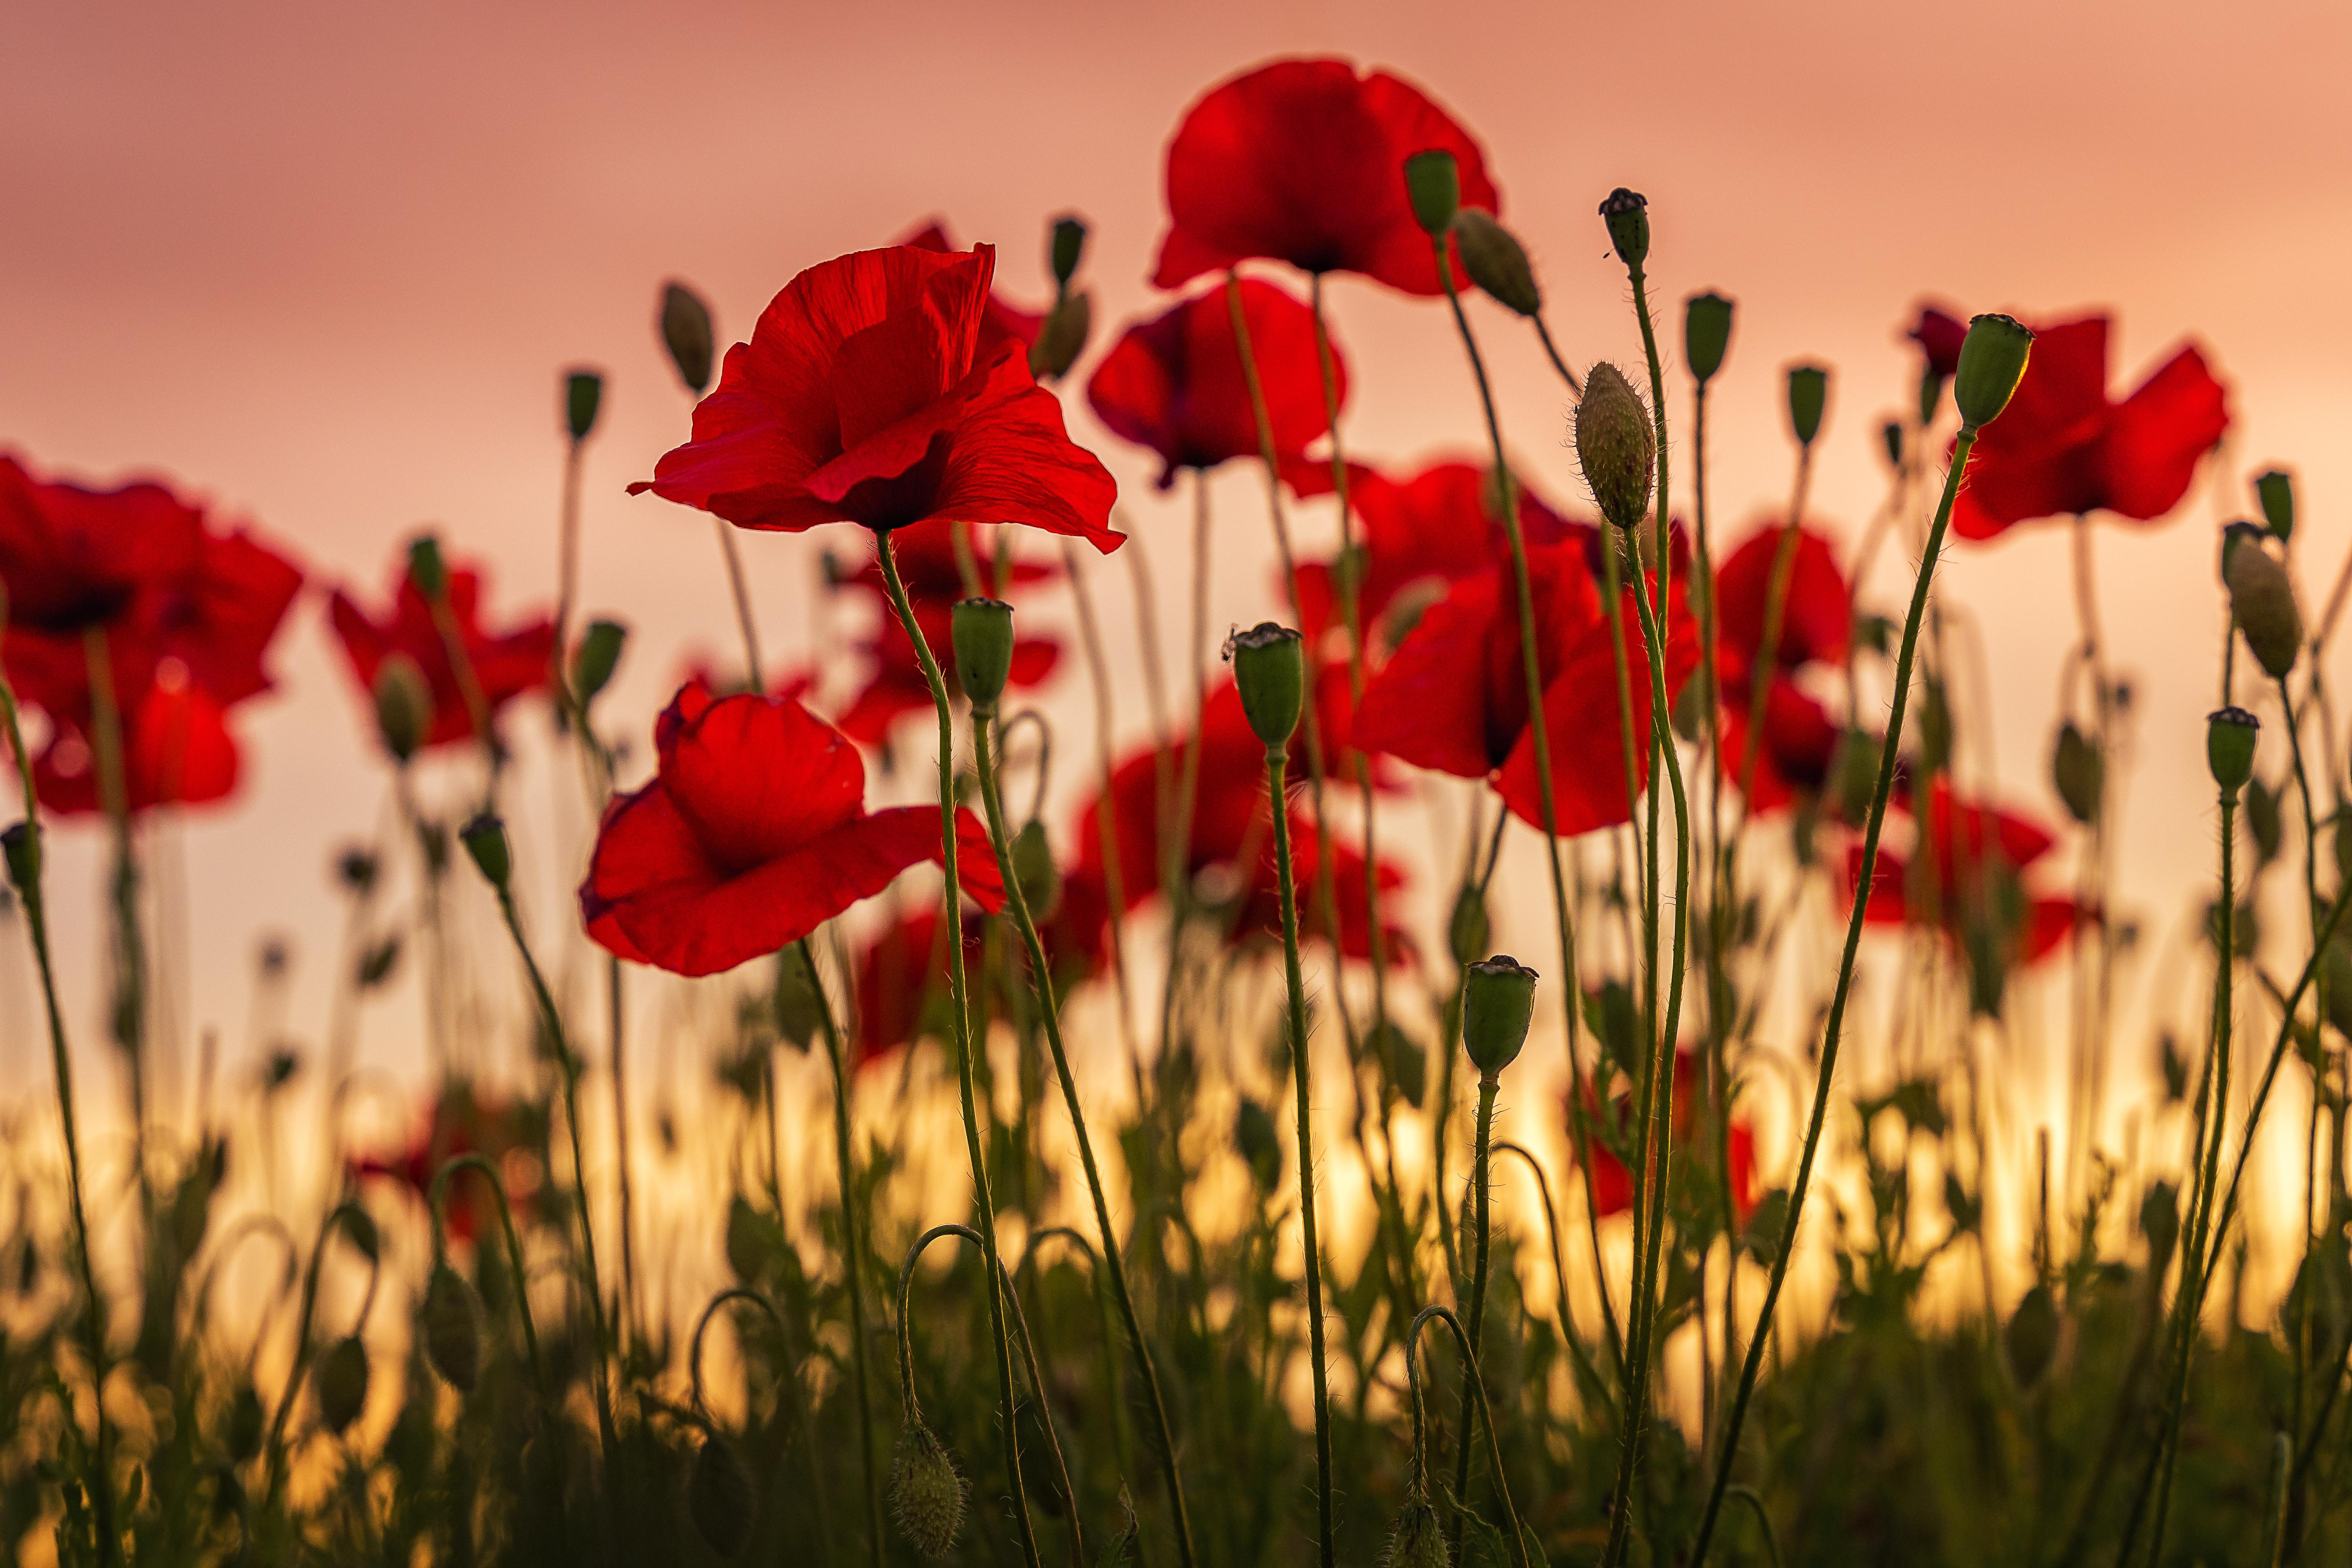 Poppies in a field: Image credit Bart Ros, Unsplash